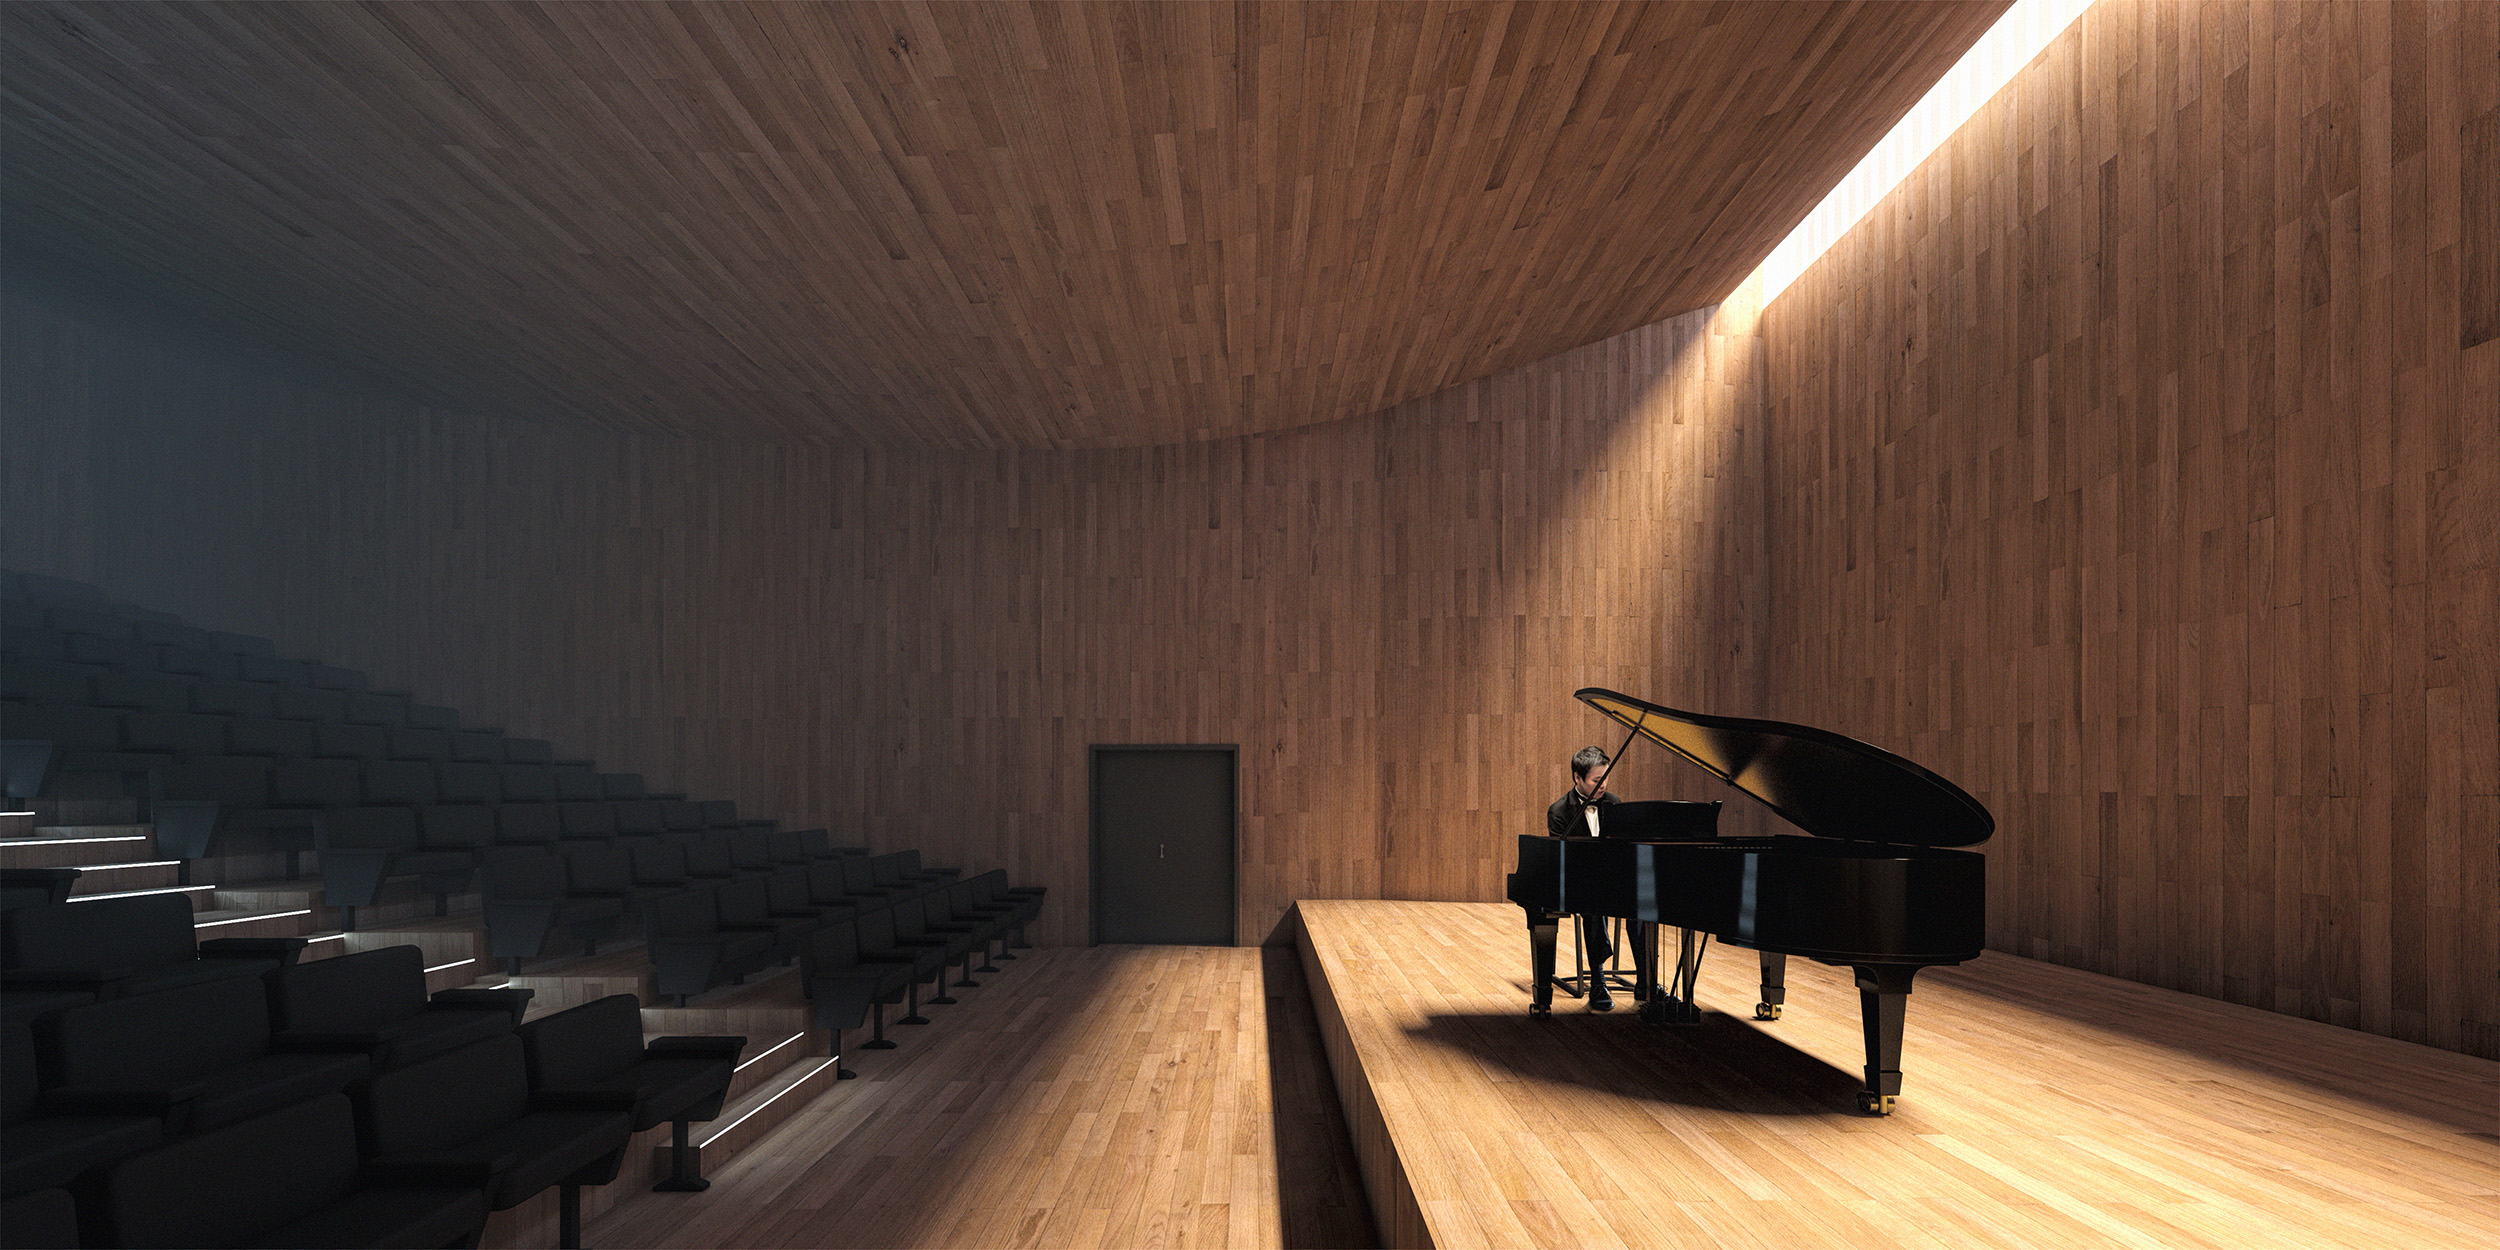 “Chopin’s Music Centre Renderings” by ELEMENT VISUALIZATIONS